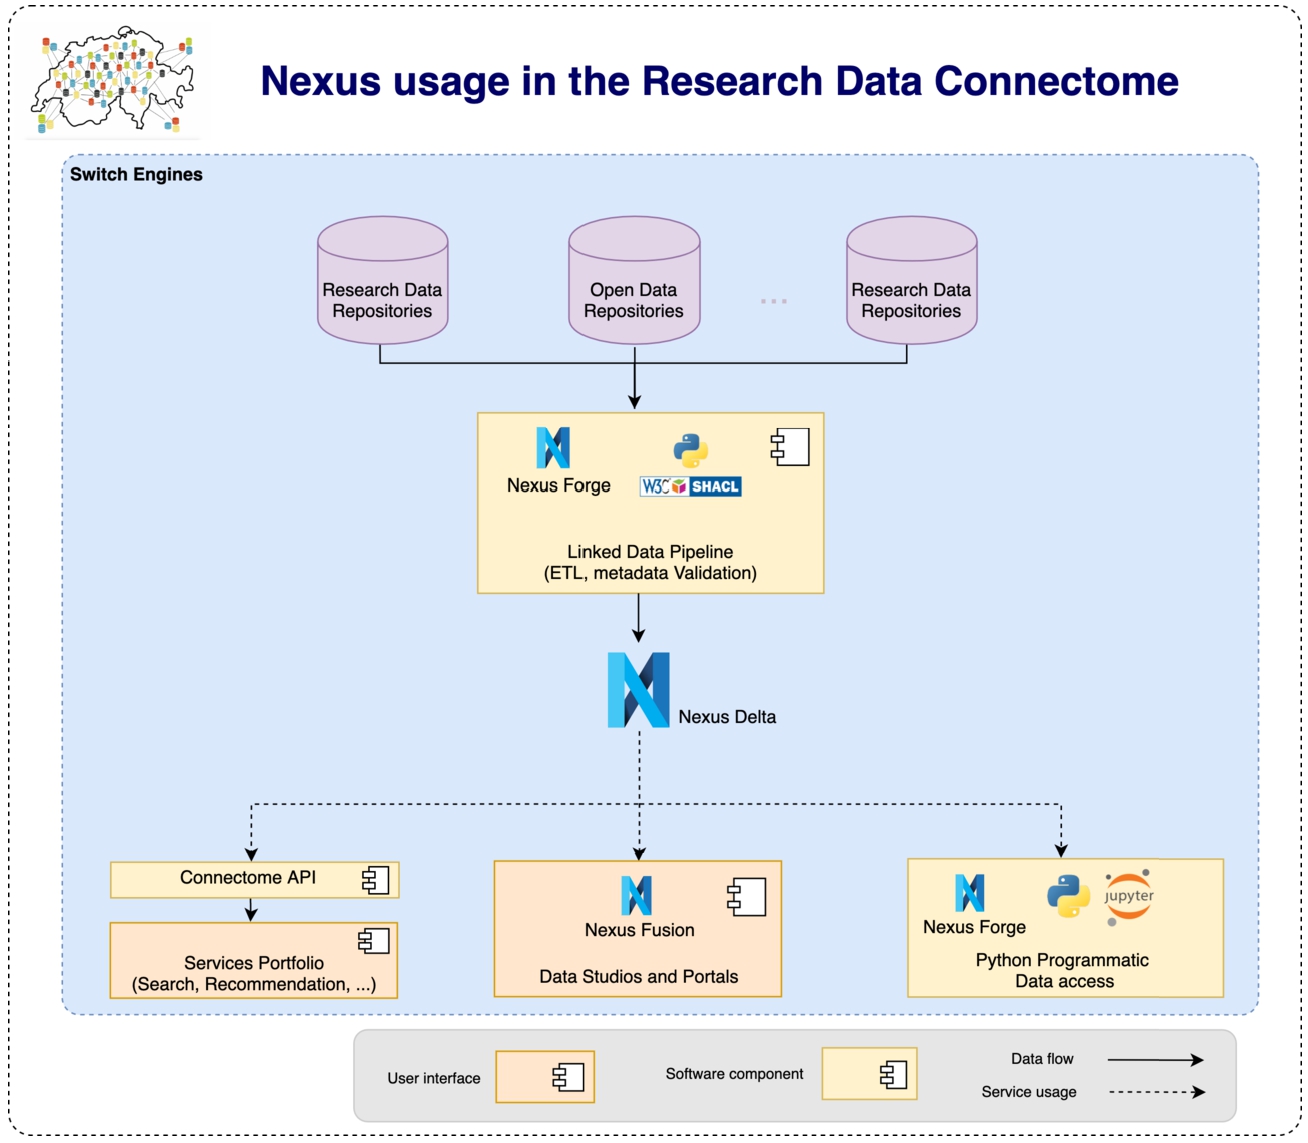 The Research Data Connectome uses BBN to implement a linked data pipelines allowing the project to extract, transform, validate, store and connect in a knowledge graph research data from different data providers’ repositories. The data can then be shared through BBN or through dedicated Web-based Services.